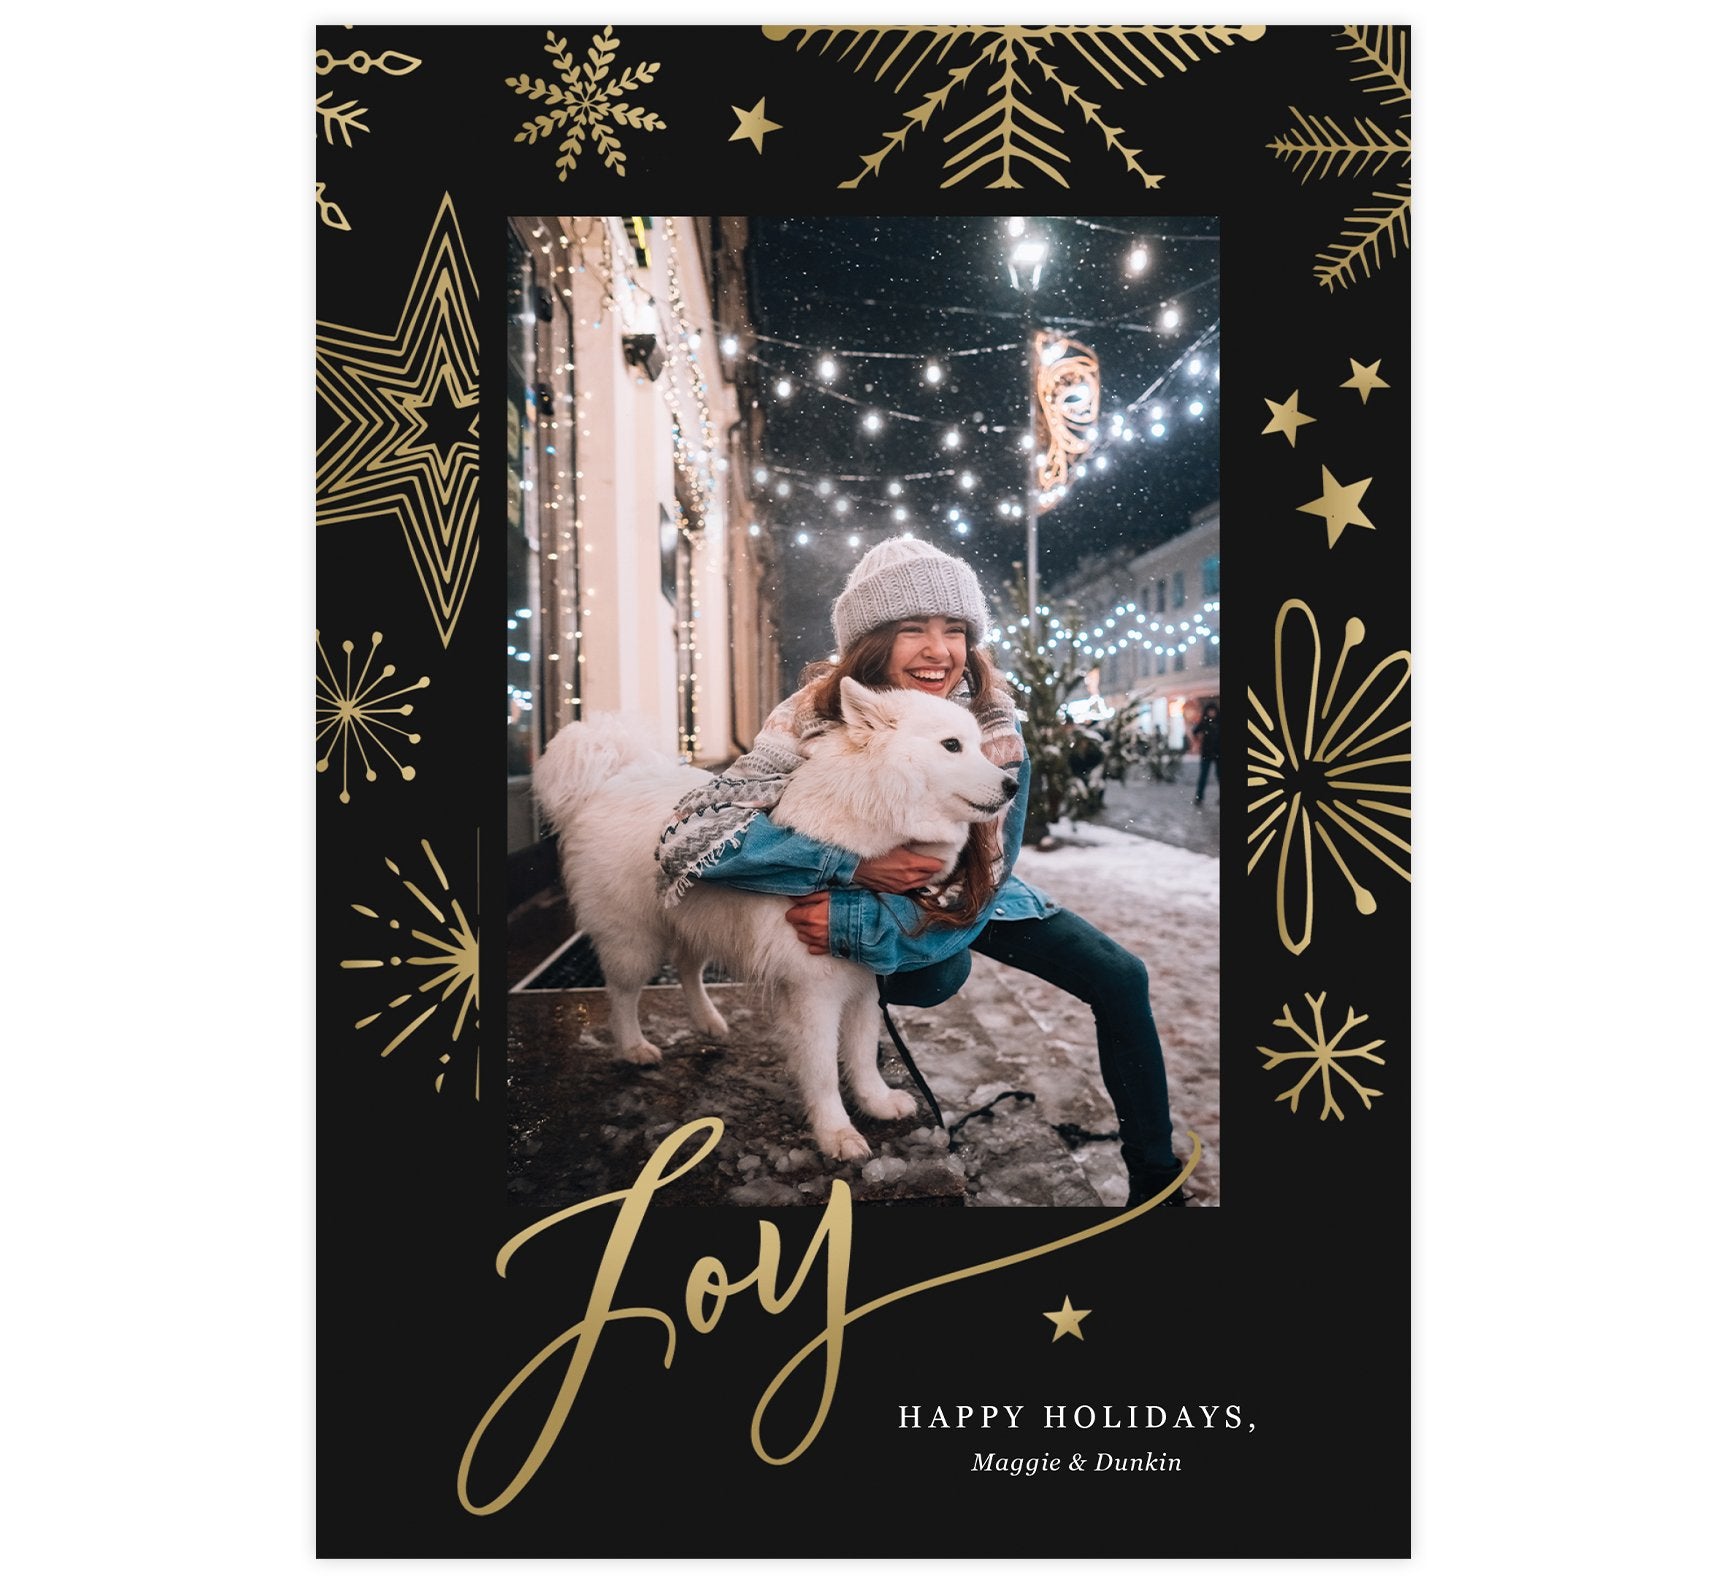 Gold Joy Holiday Card; Dark black background with gold snowflakes and one image spot in the middle. Large, gold "Joy" is at the bottom overlapping the bottom of the image.